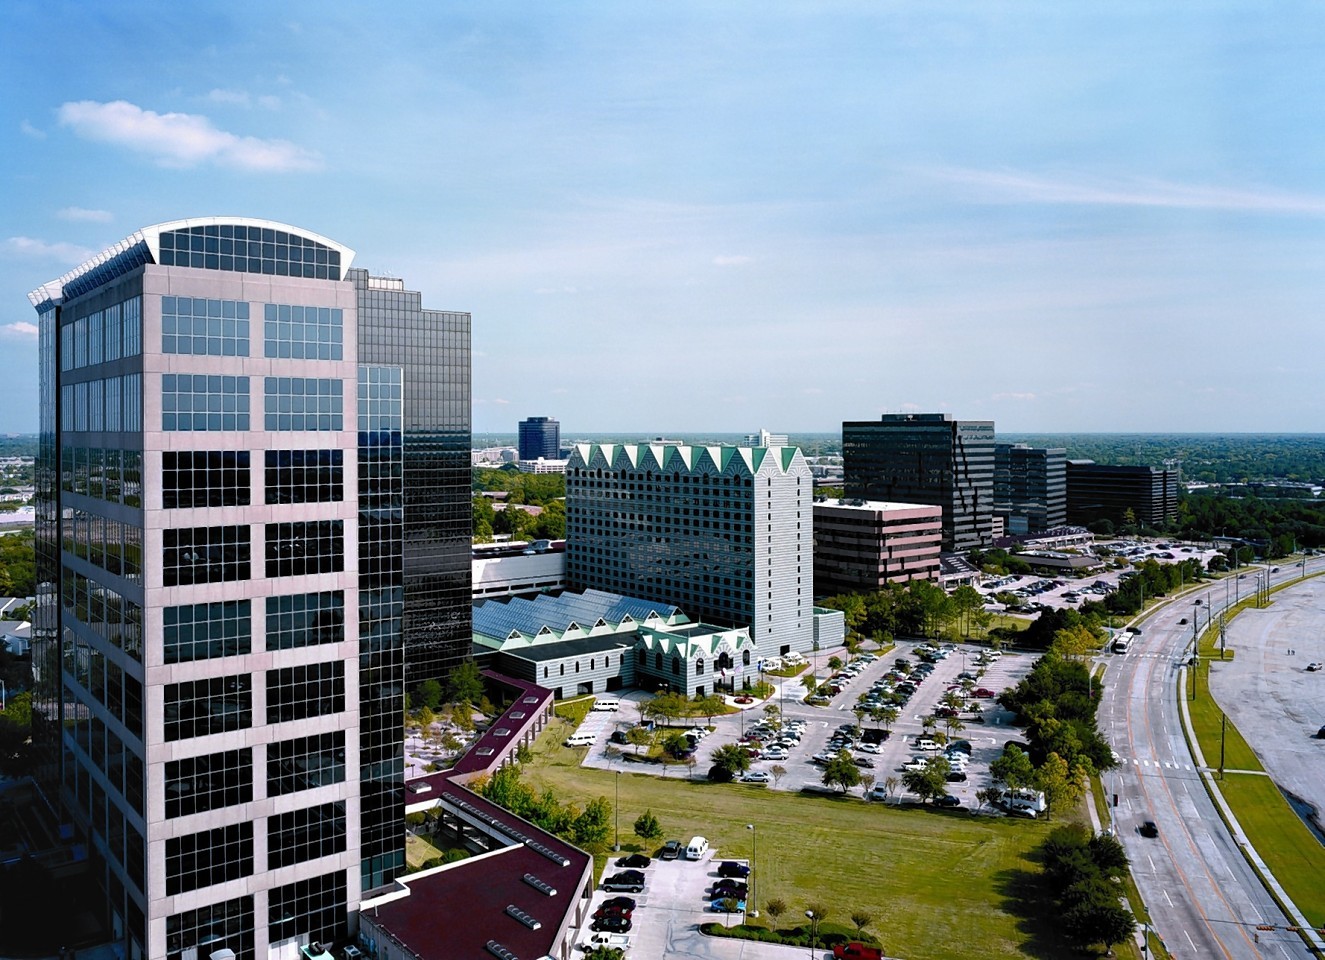 Houston's Greenspoint  business district